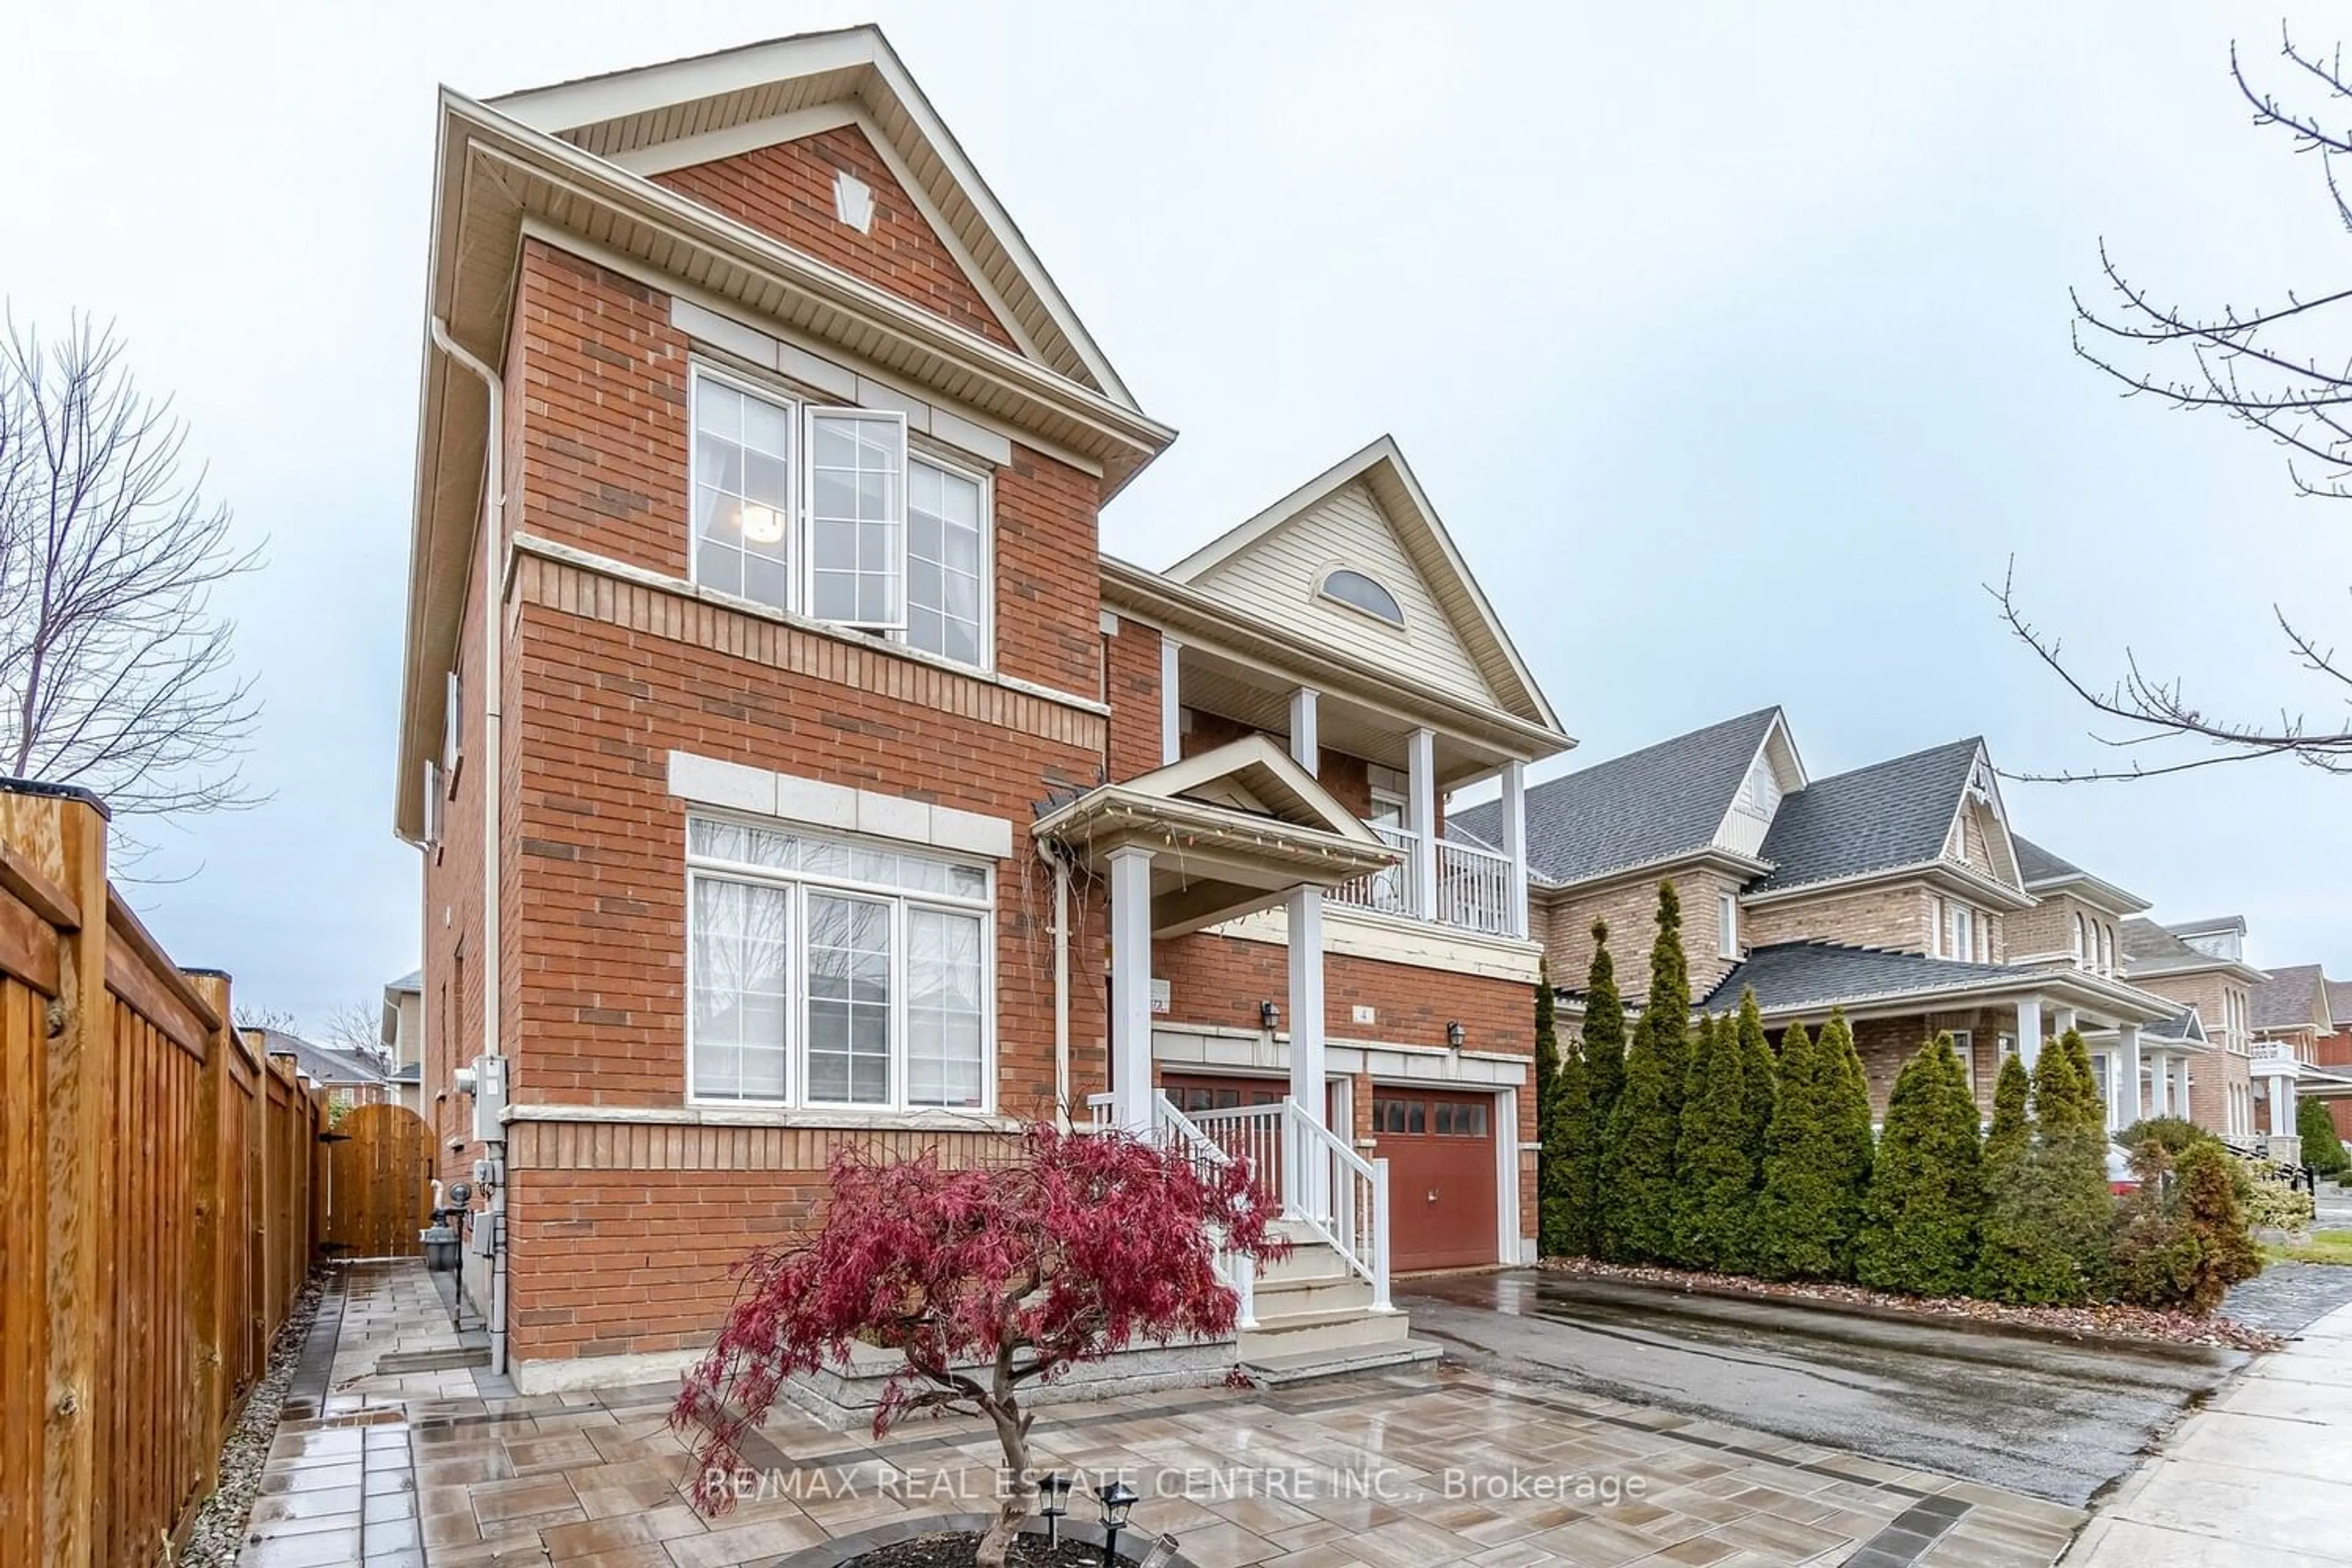 Home with brick exterior material for 4 Hawkweed Manr, Markham Ontario L6B 0E3